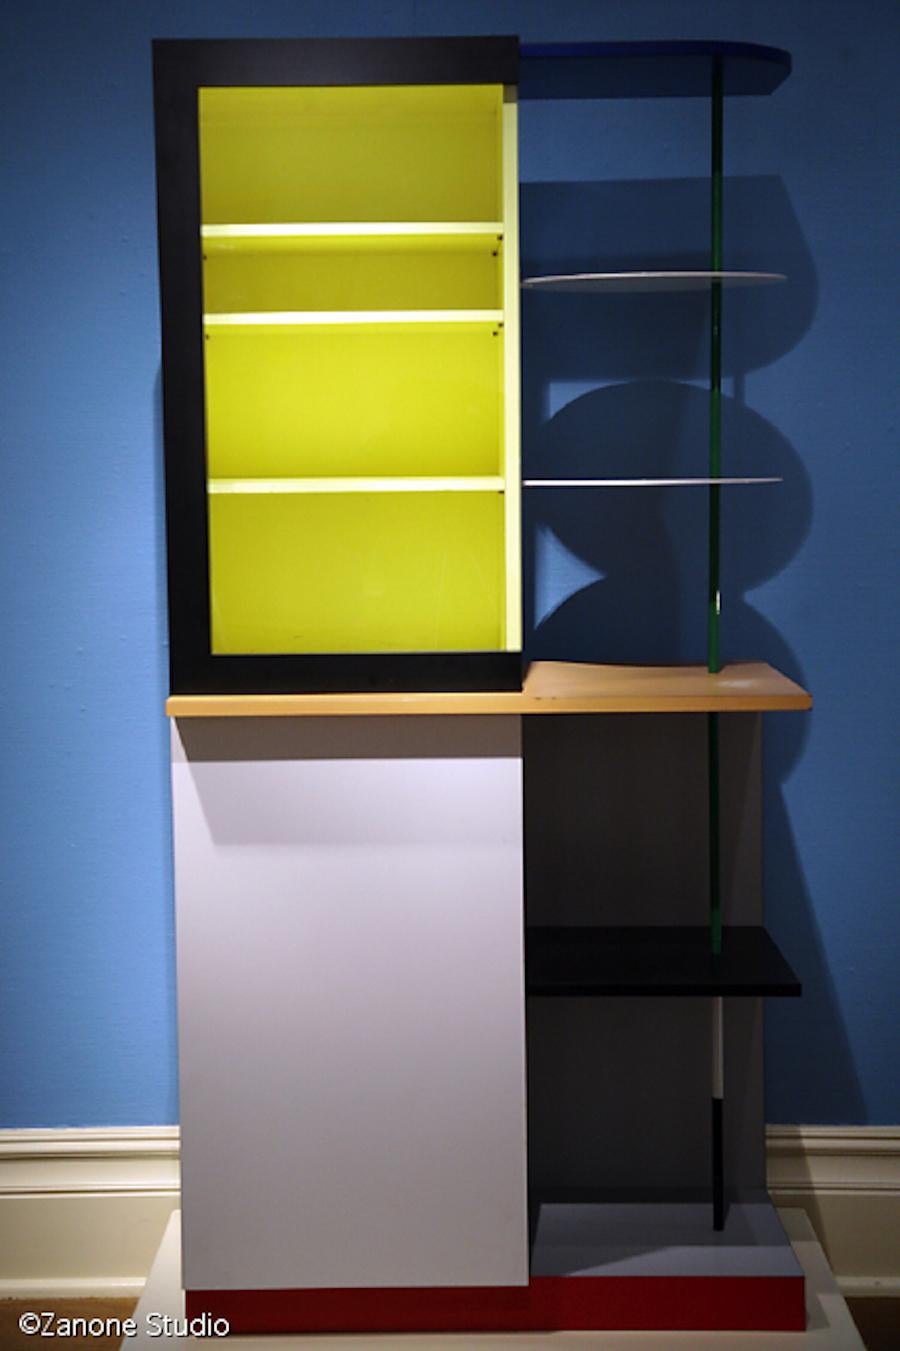 Memphis Milano Airport Cabinet by Gerard Taylor 1982, De Stijl, Red Yellow Blue (Postmoderne)